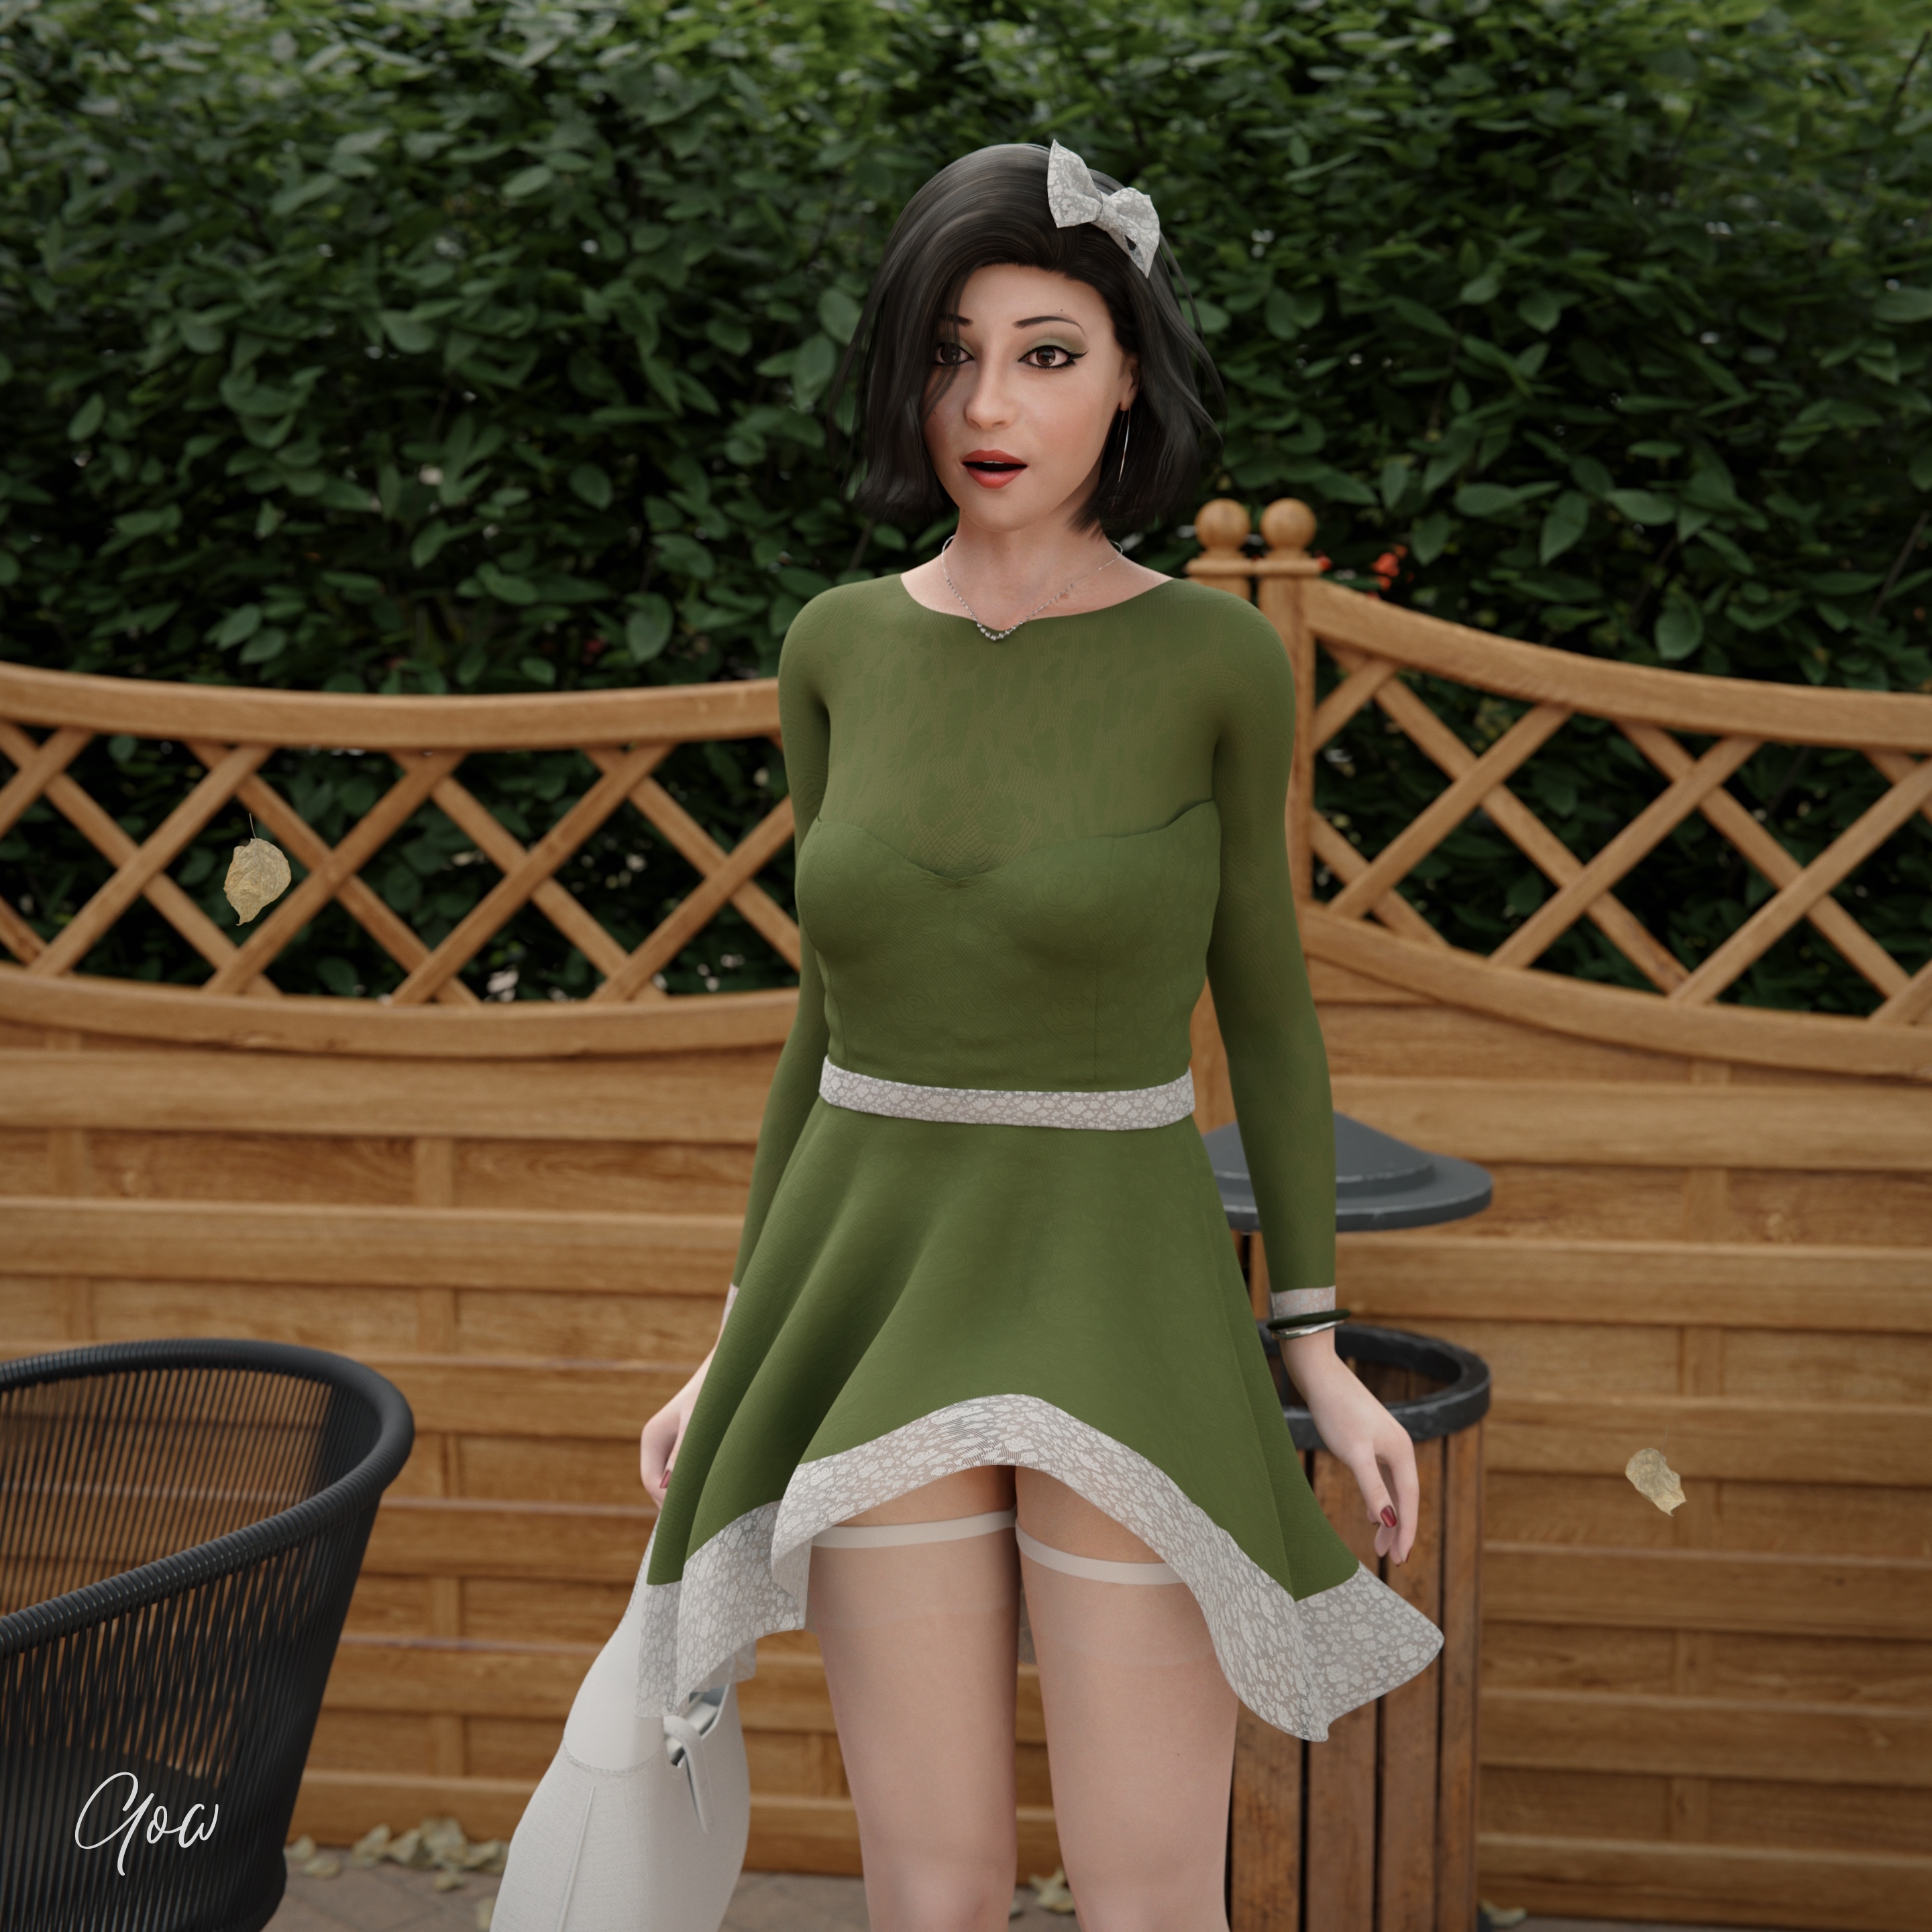 Rona in Greencaffe pt2 (Windy days) White Ballerina Cosplay Nylon Milf Clothed Upskirt Wet Pussy Story Legs Spread Legs Tease Photorealistic No Panties Dress Partially_clothed Outdoor Party Dress Lifted_skirt Skirt Original Character 12